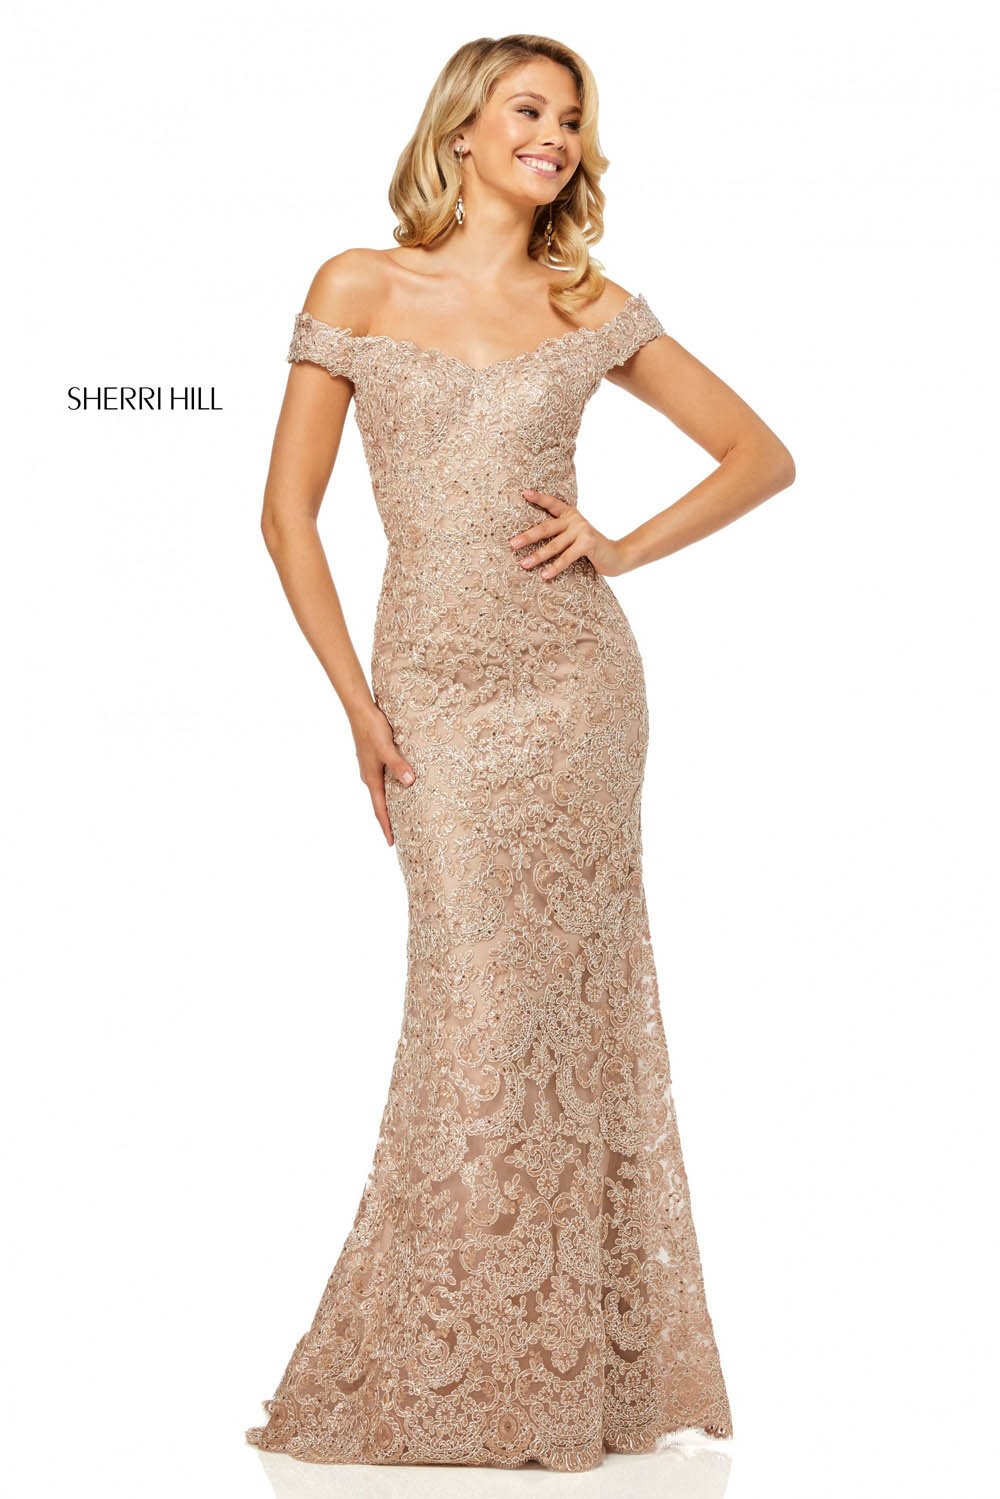 Sherri Hill 52556 dress images in these colors: Rose Gold, Wine, Ivory Gold, Black, Light Blue.